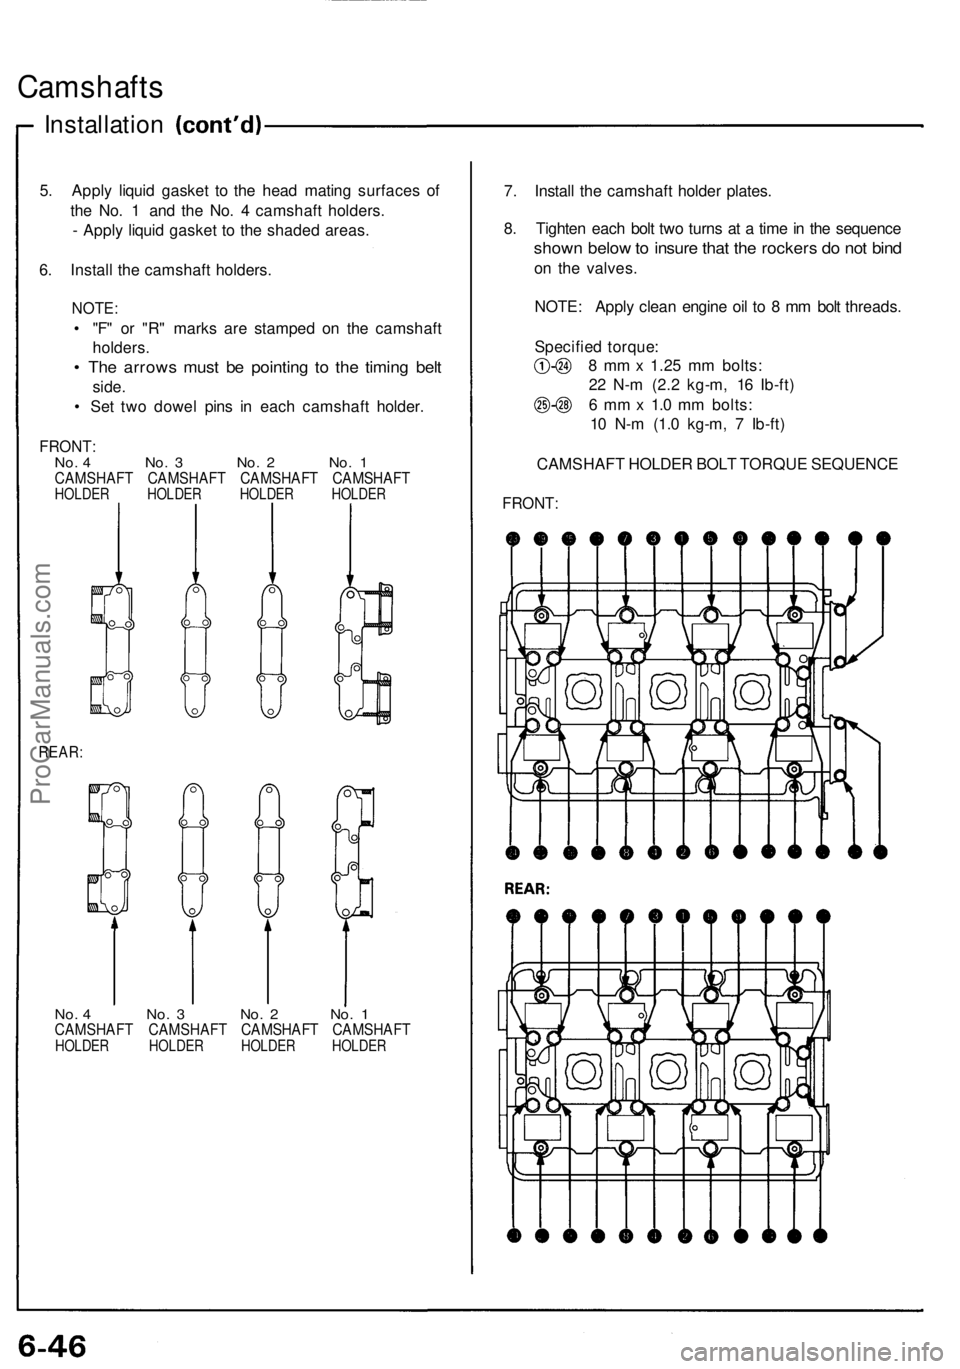 ACURA NSX 1991  Service Repair Manual 
Camshafts

Installation

5. Apply liquid gasket to the head mating surfaces of

the No. 1 and the No. 4 camshaft holders.

- Apply liquid gasket to the shaded areas.

6. Install the camshaft holders.